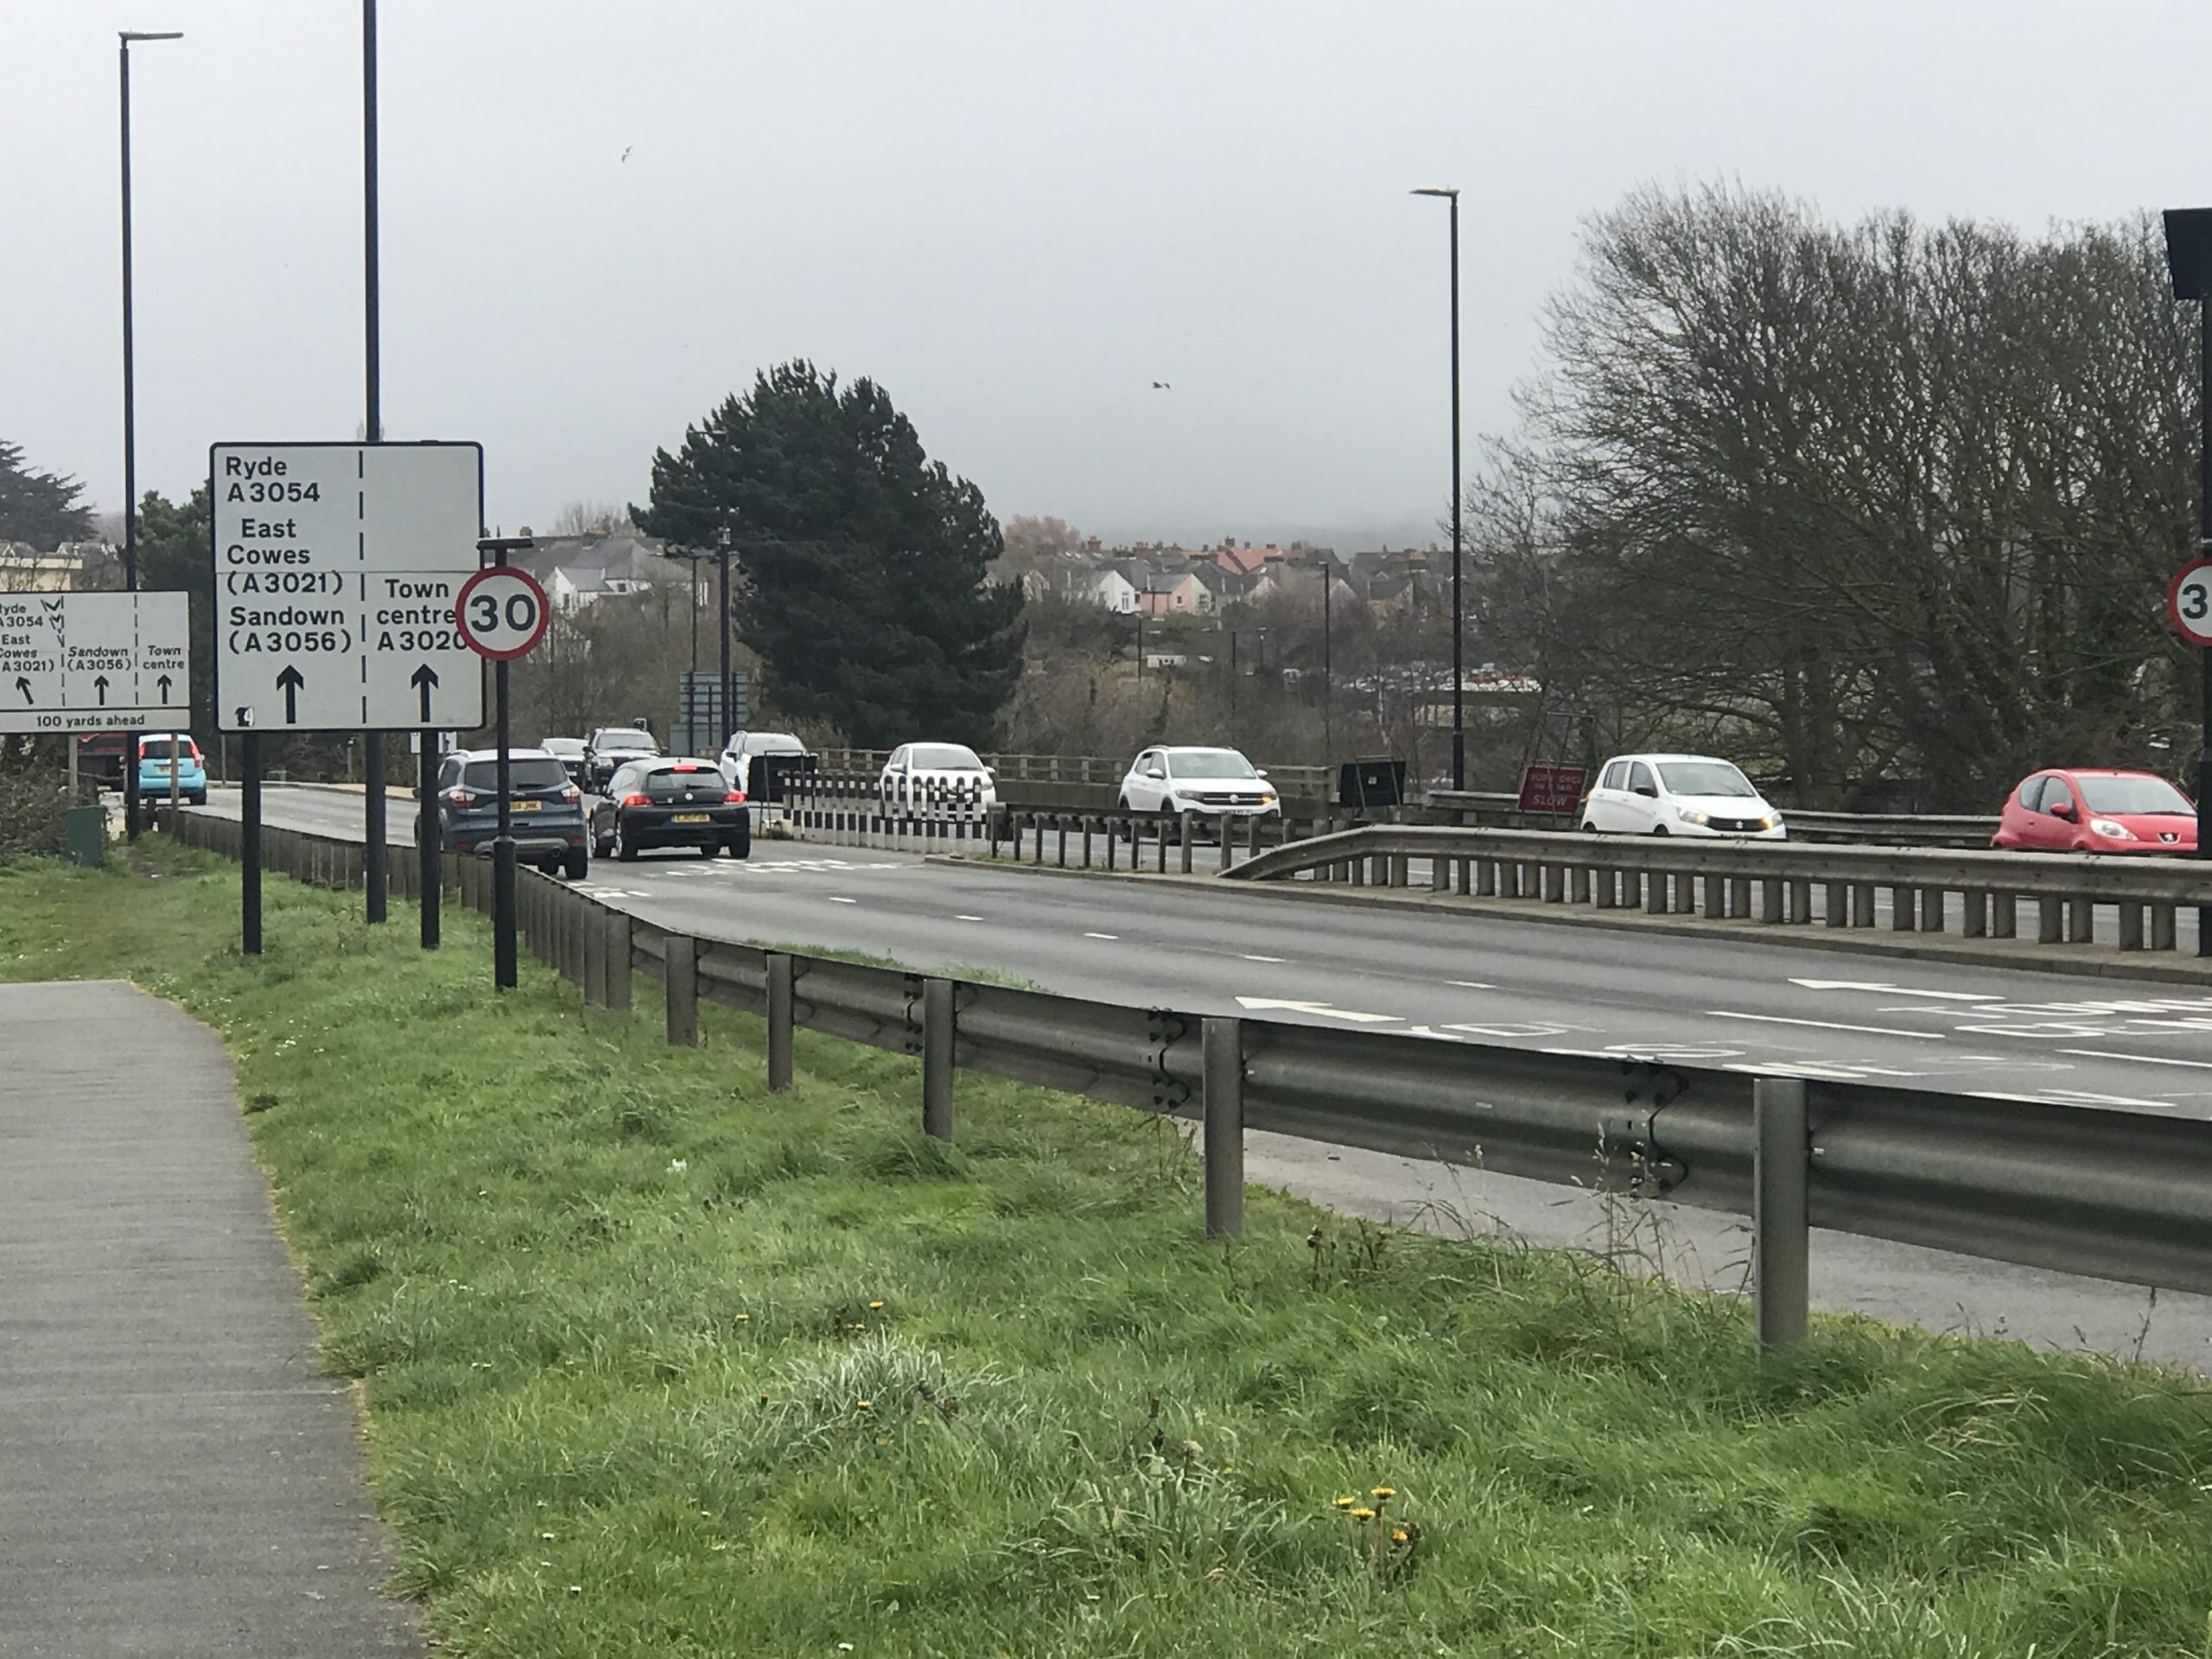 Photo showing the southbound part of Medina Way (dual carriageway) in Newport